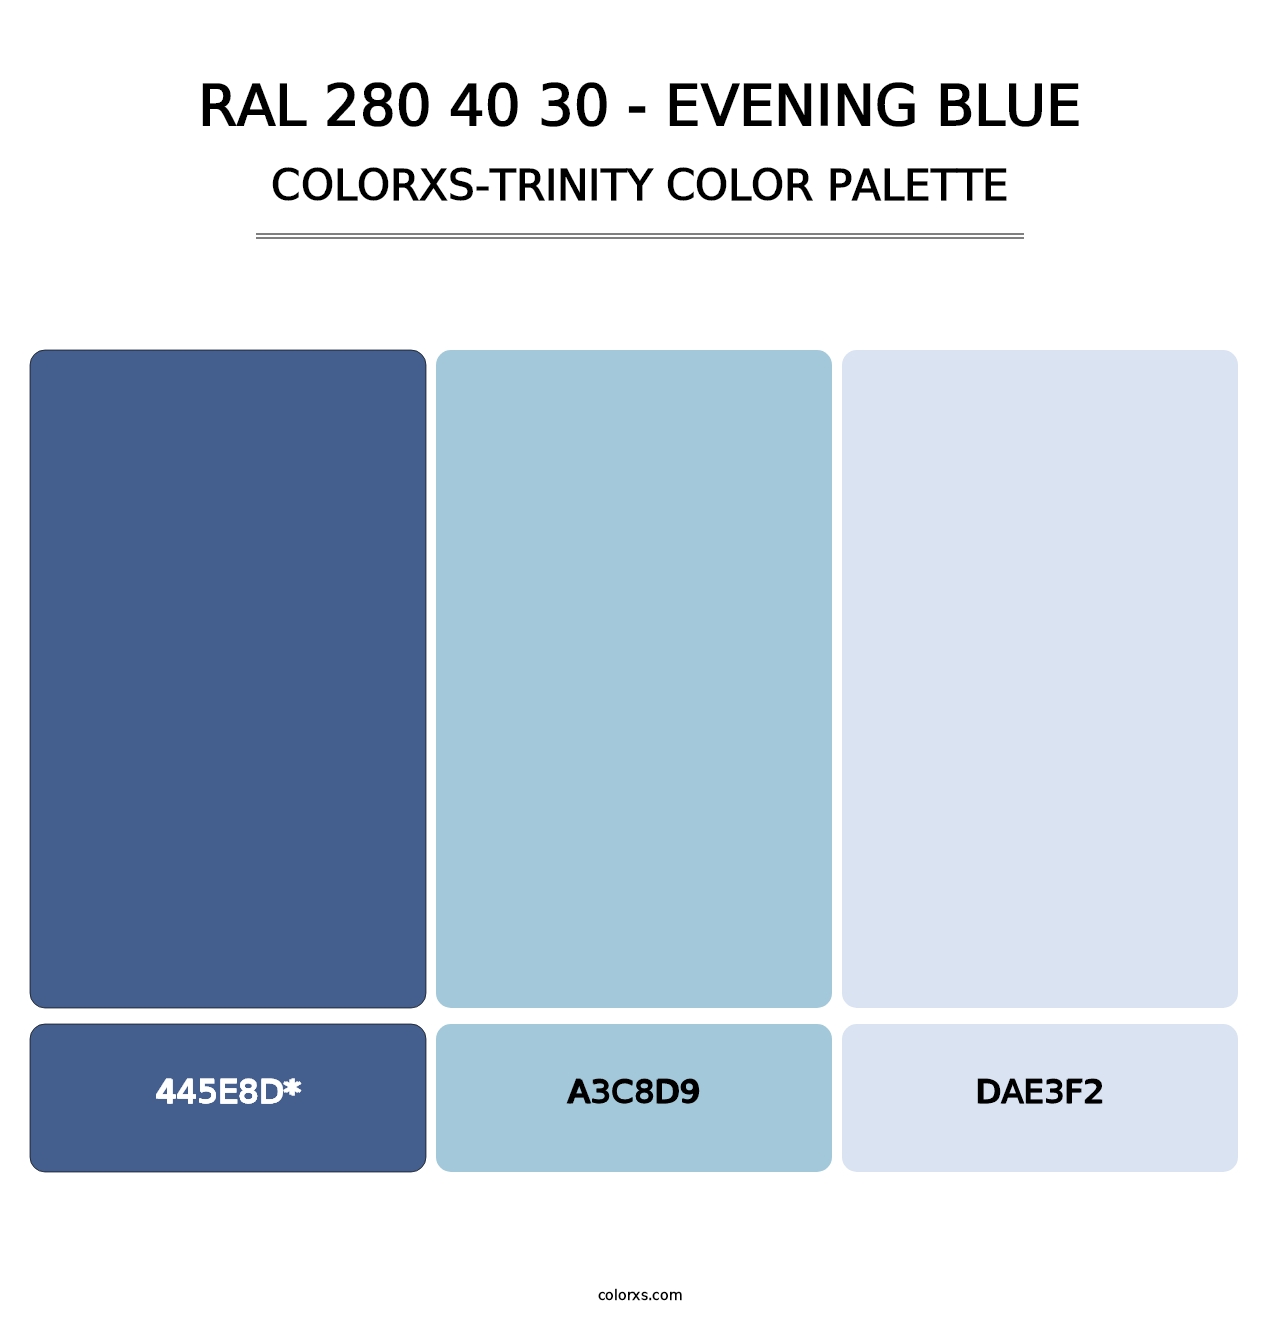 RAL 280 40 30 - Evening Blue - Colorxs Trinity Palette